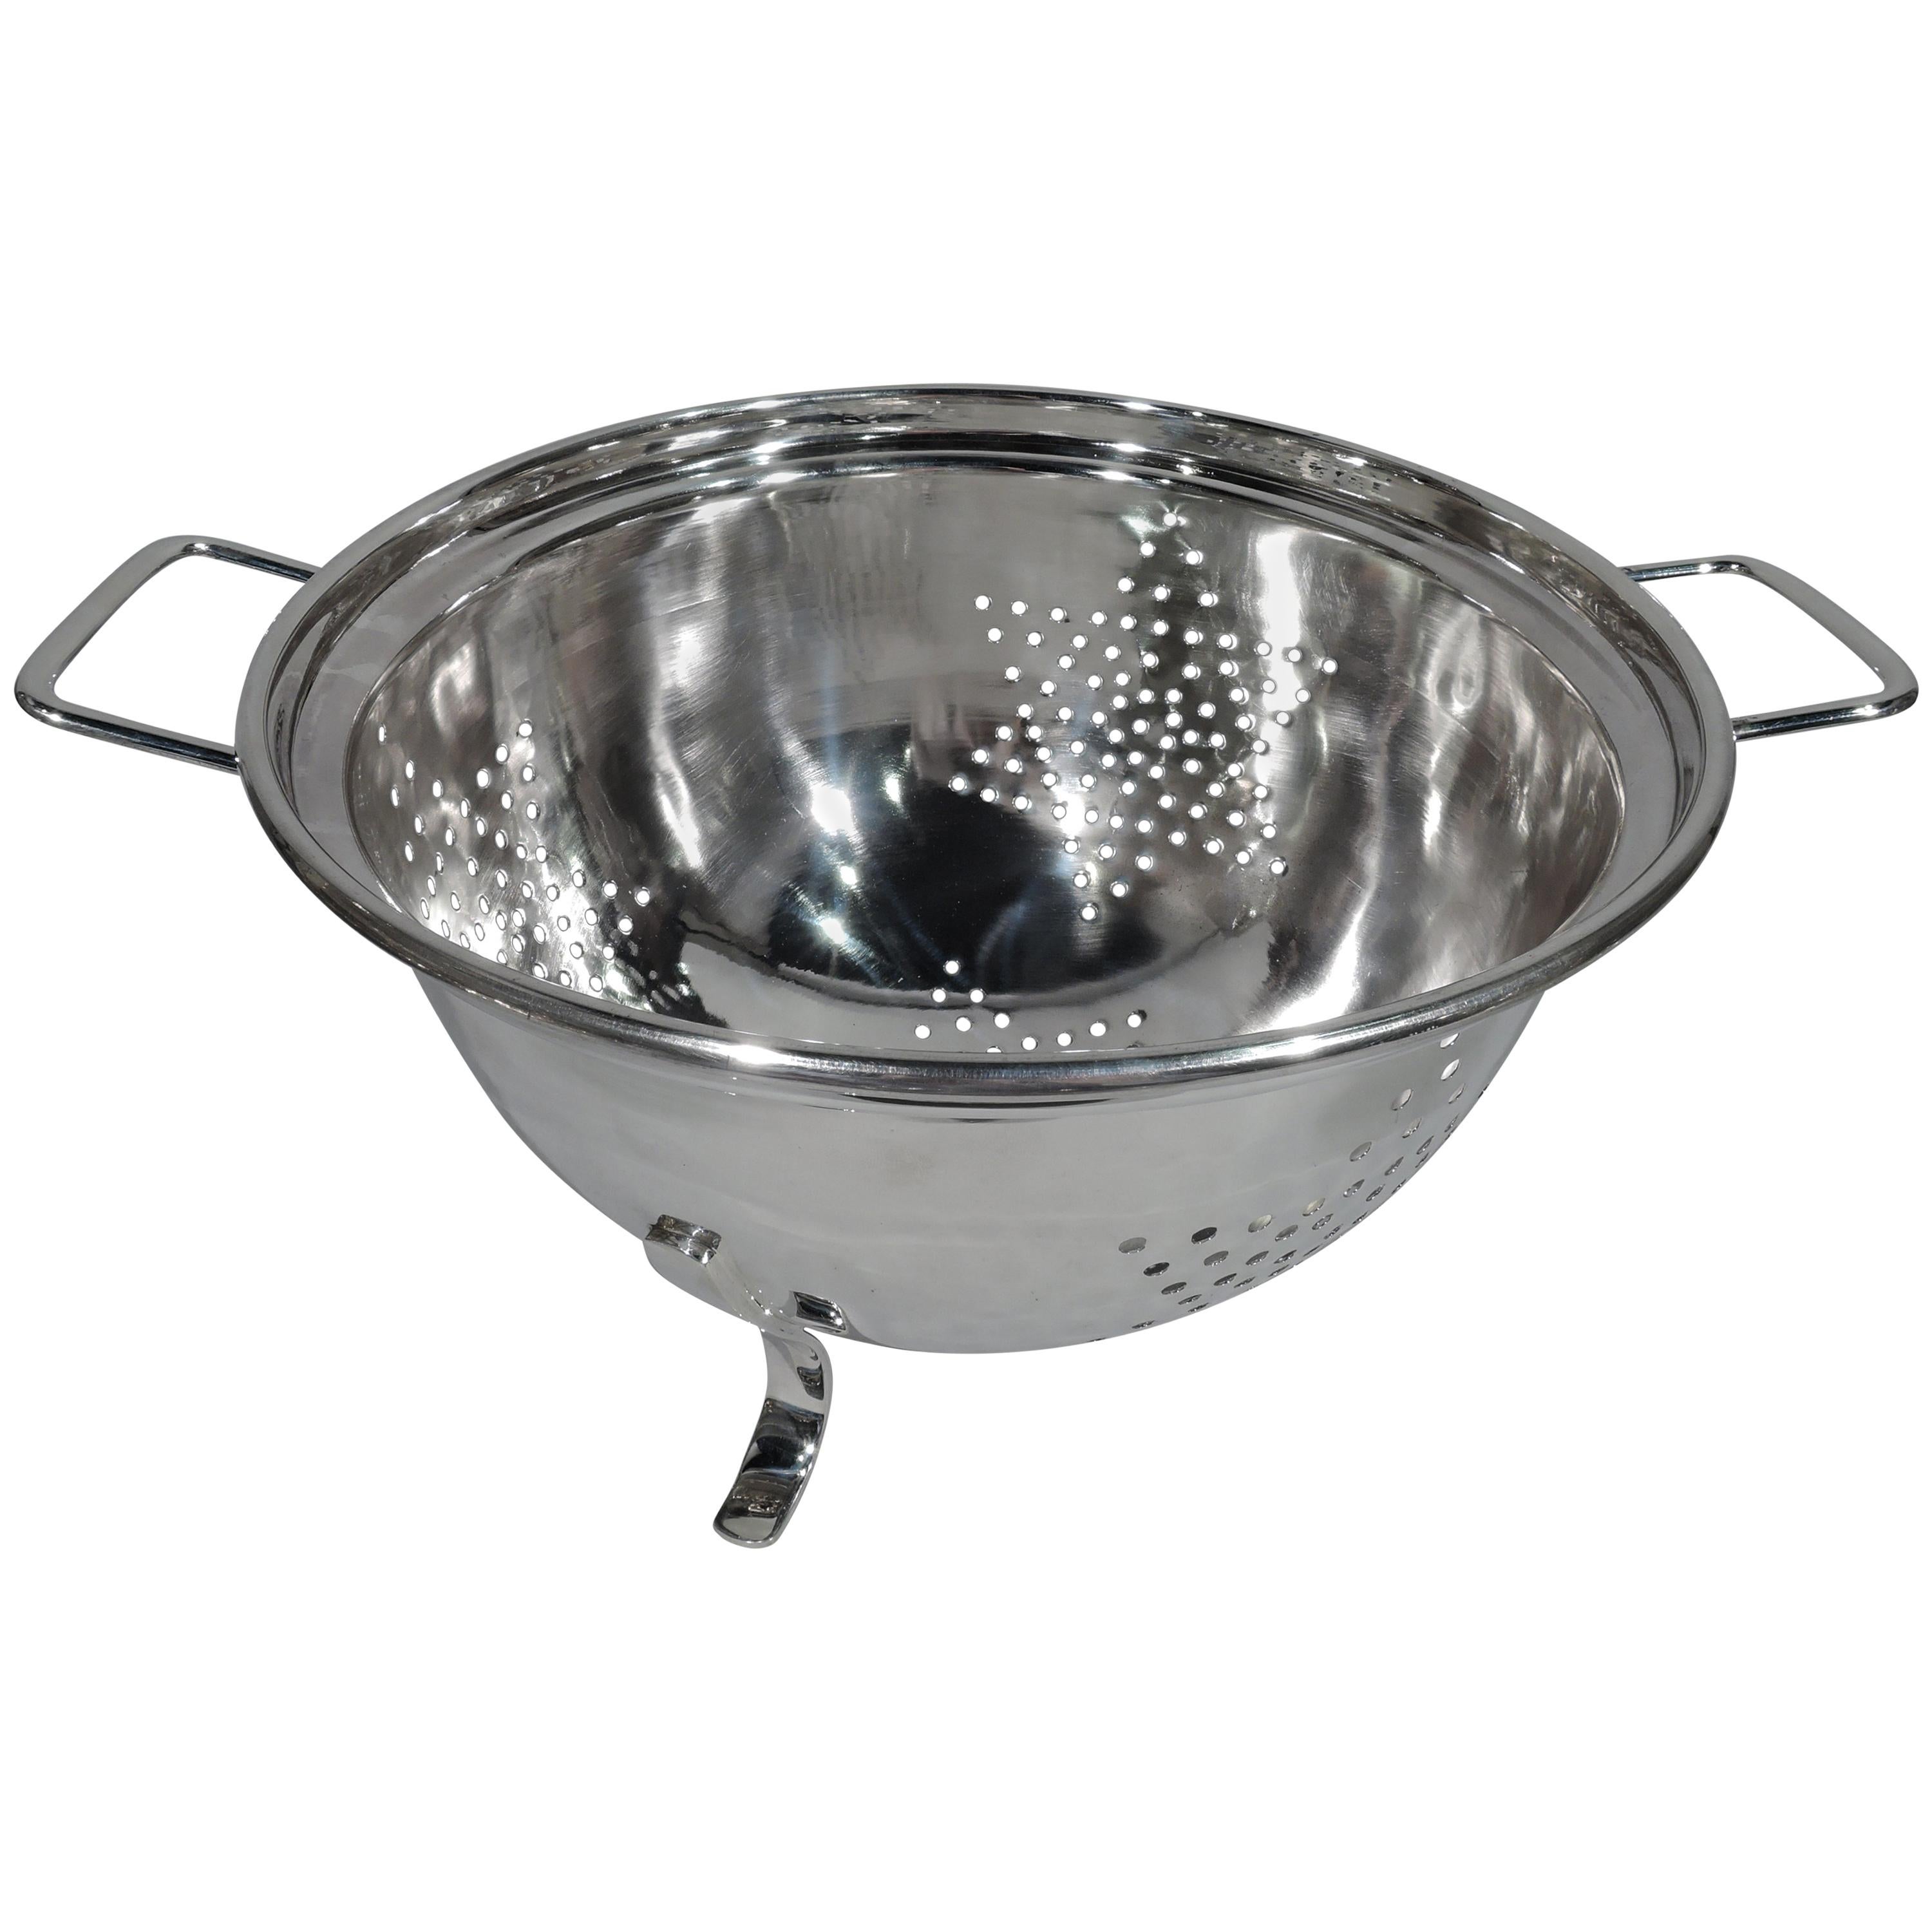 Super Luxurious Hand-Made Sterling Silver Colander by Cartier